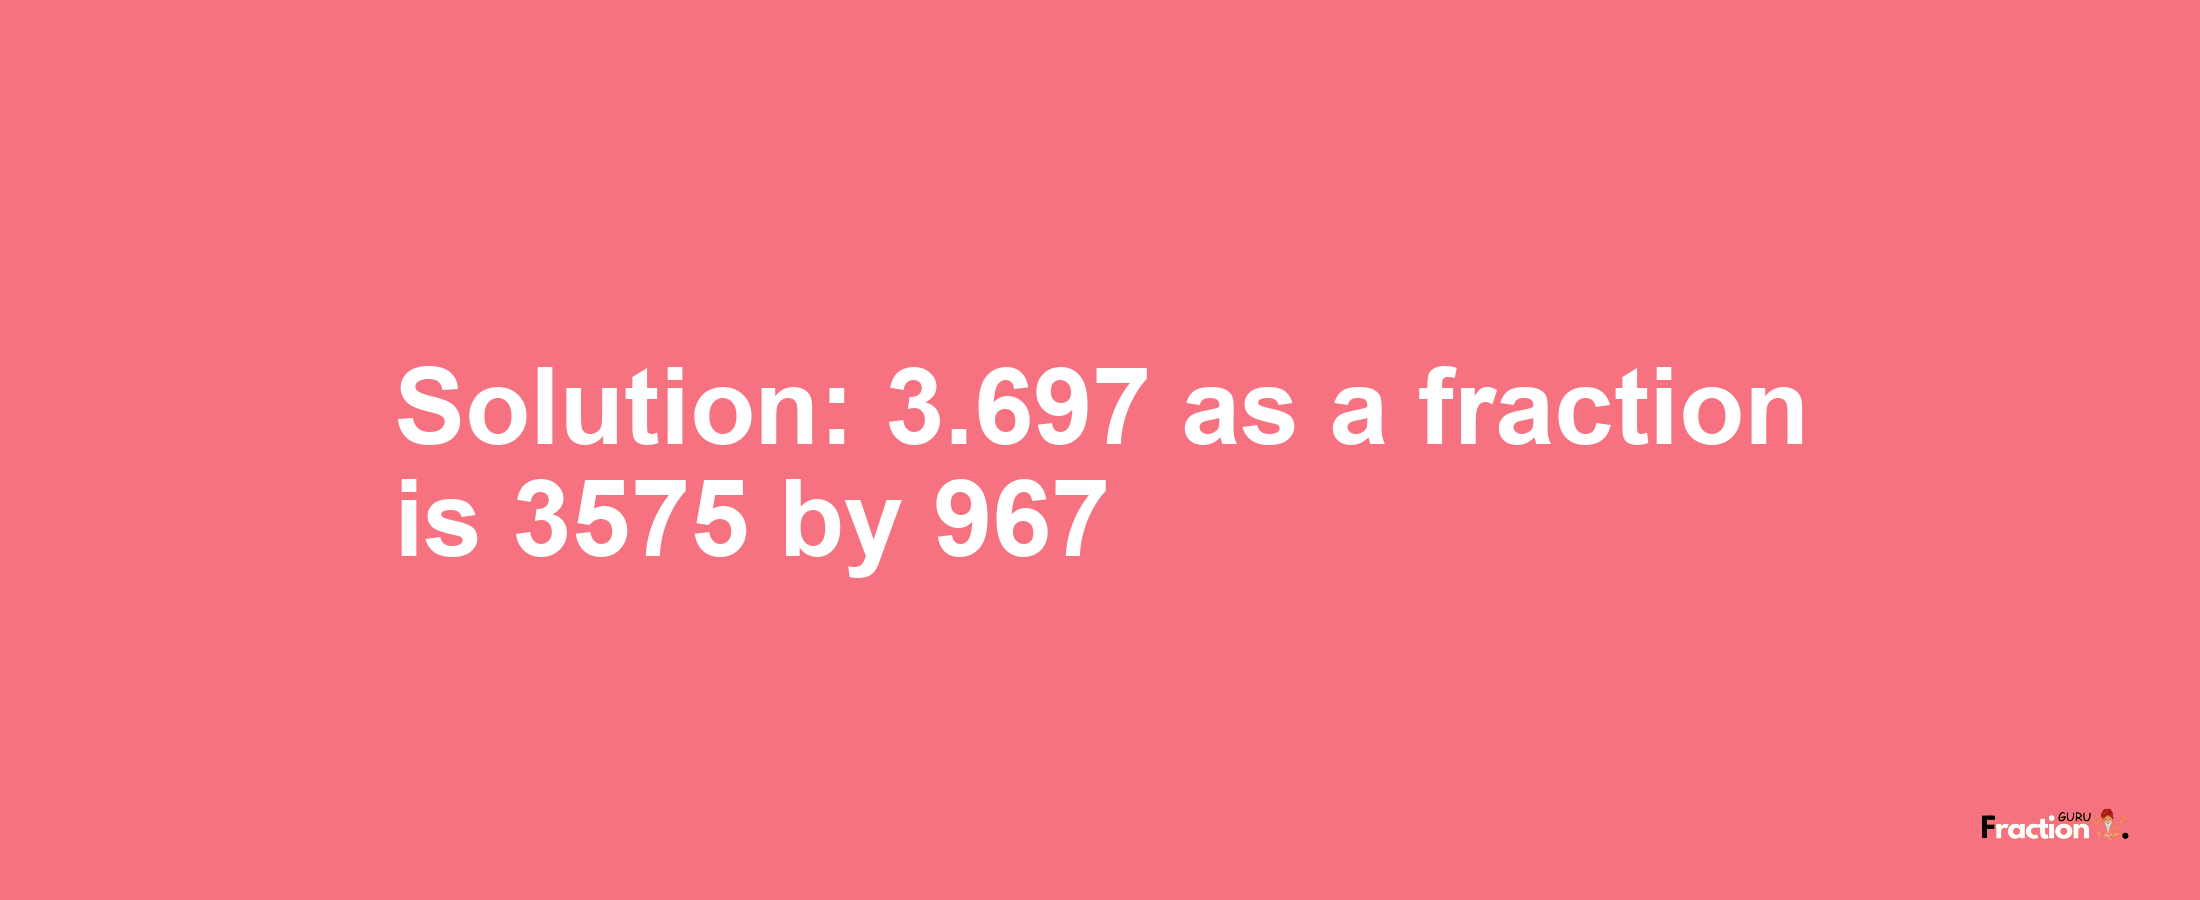 Solution:3.697 as a fraction is 3575/967